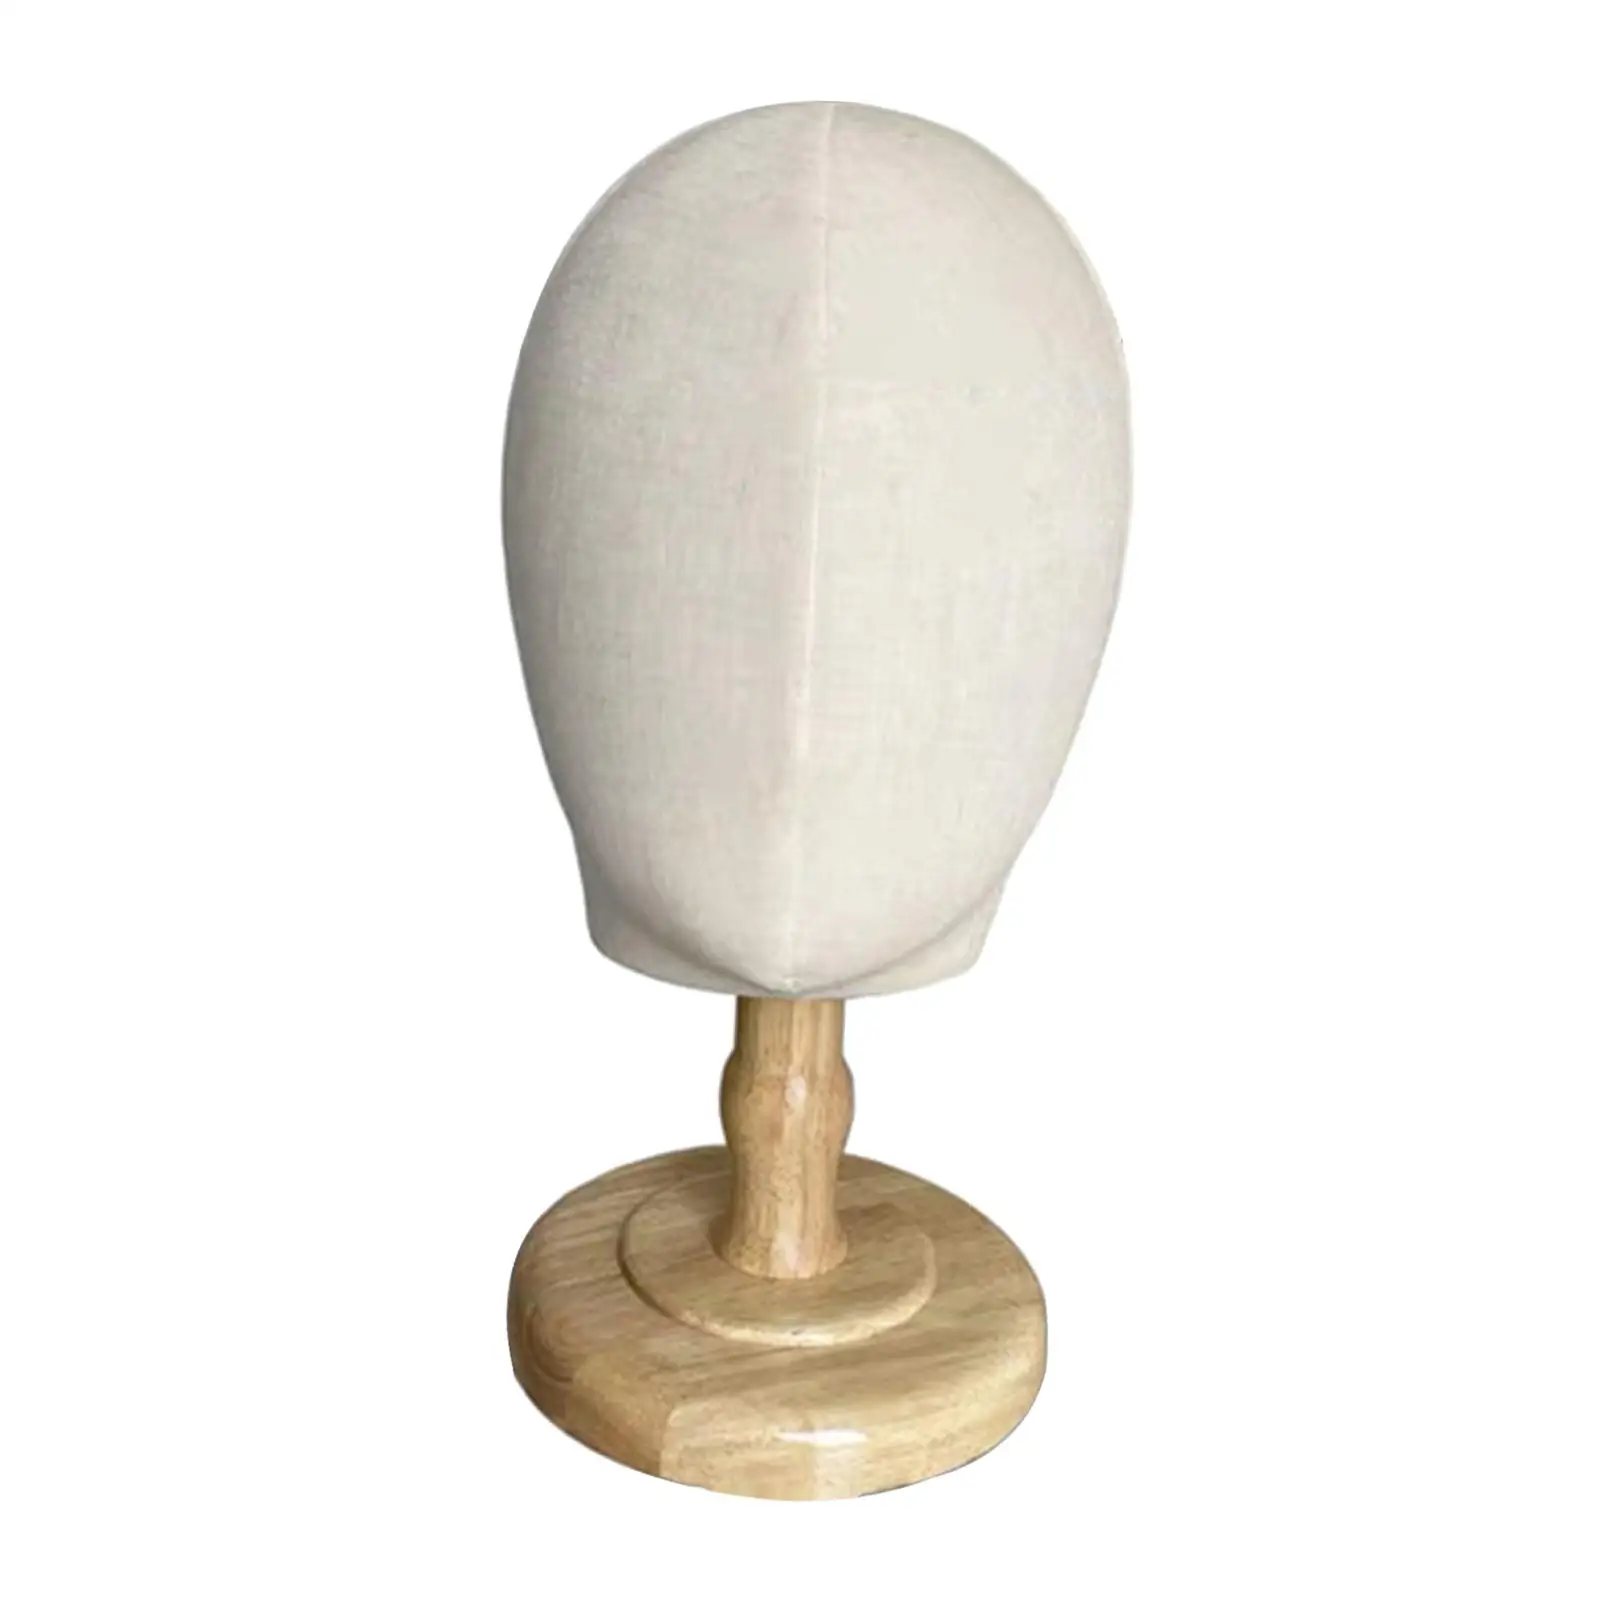 Mannequin Manikin Head Multi Function Sturdy Durable Freestanding Hat Display Stand for Shopping Mall Props Salon Home Shop